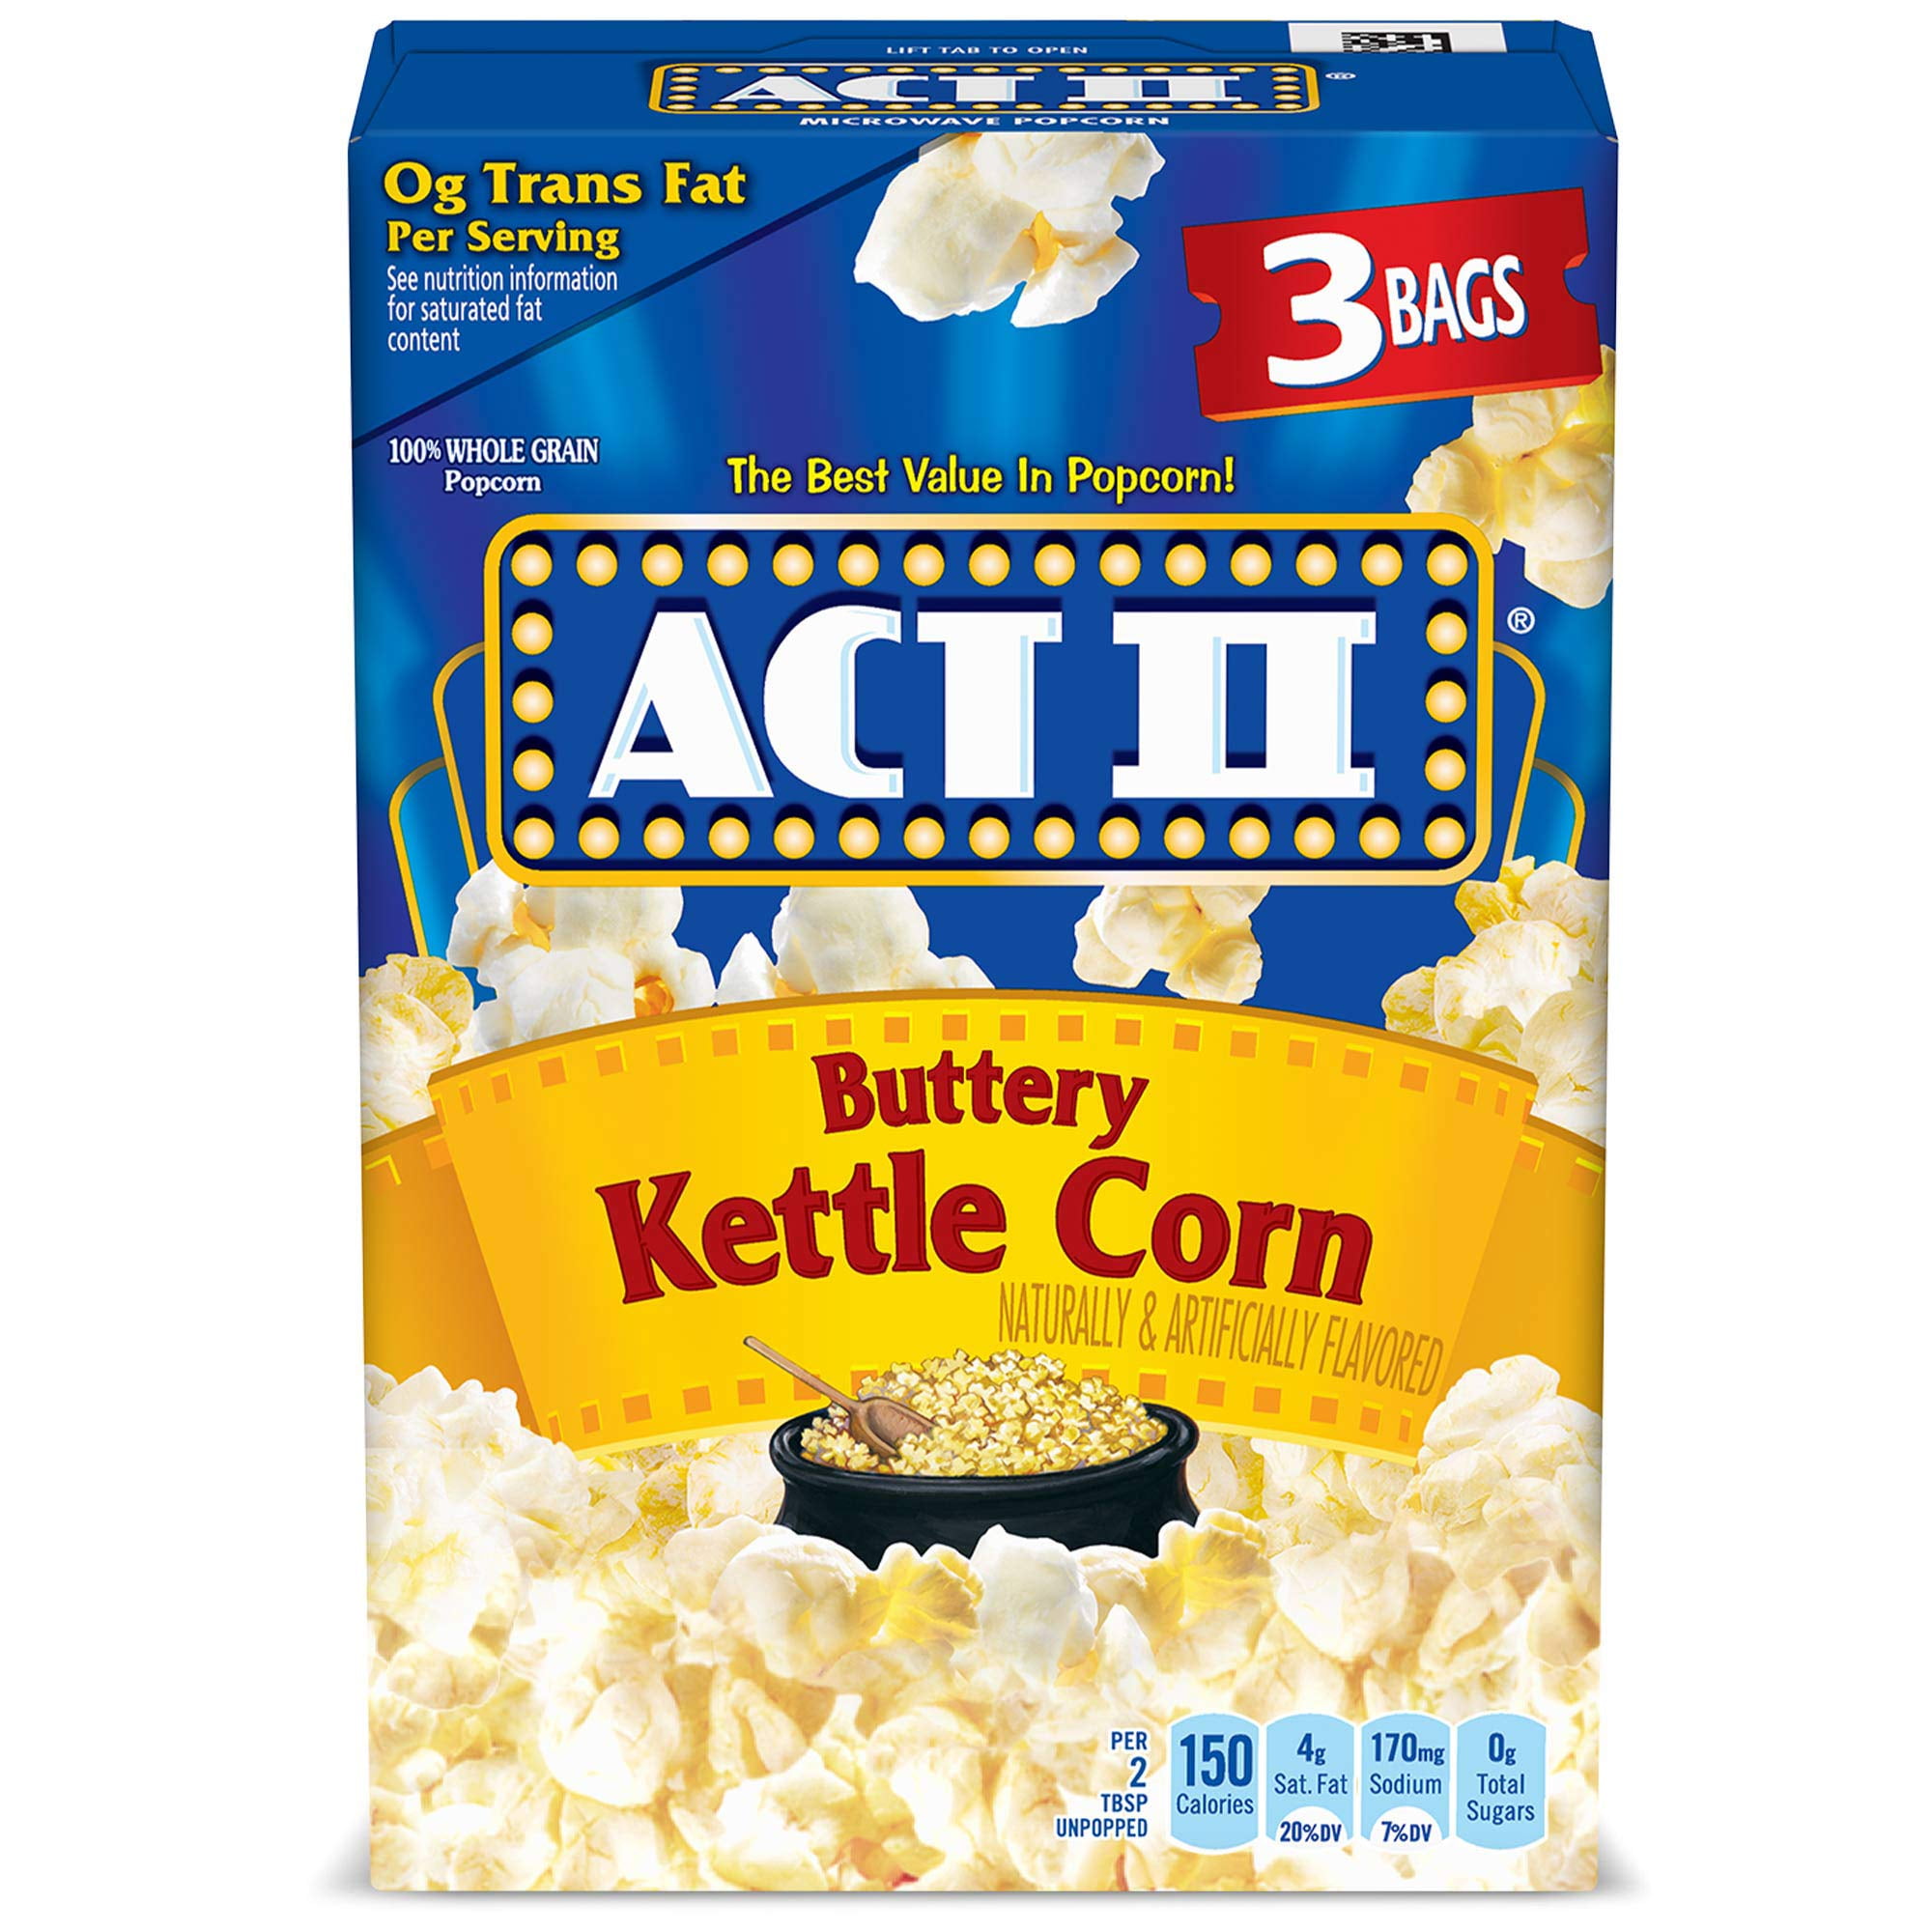 ACT II Kettle Corn Microwave Popcorn, Sweet and Salty Popcorn, 2.75 Oz, 3 Count